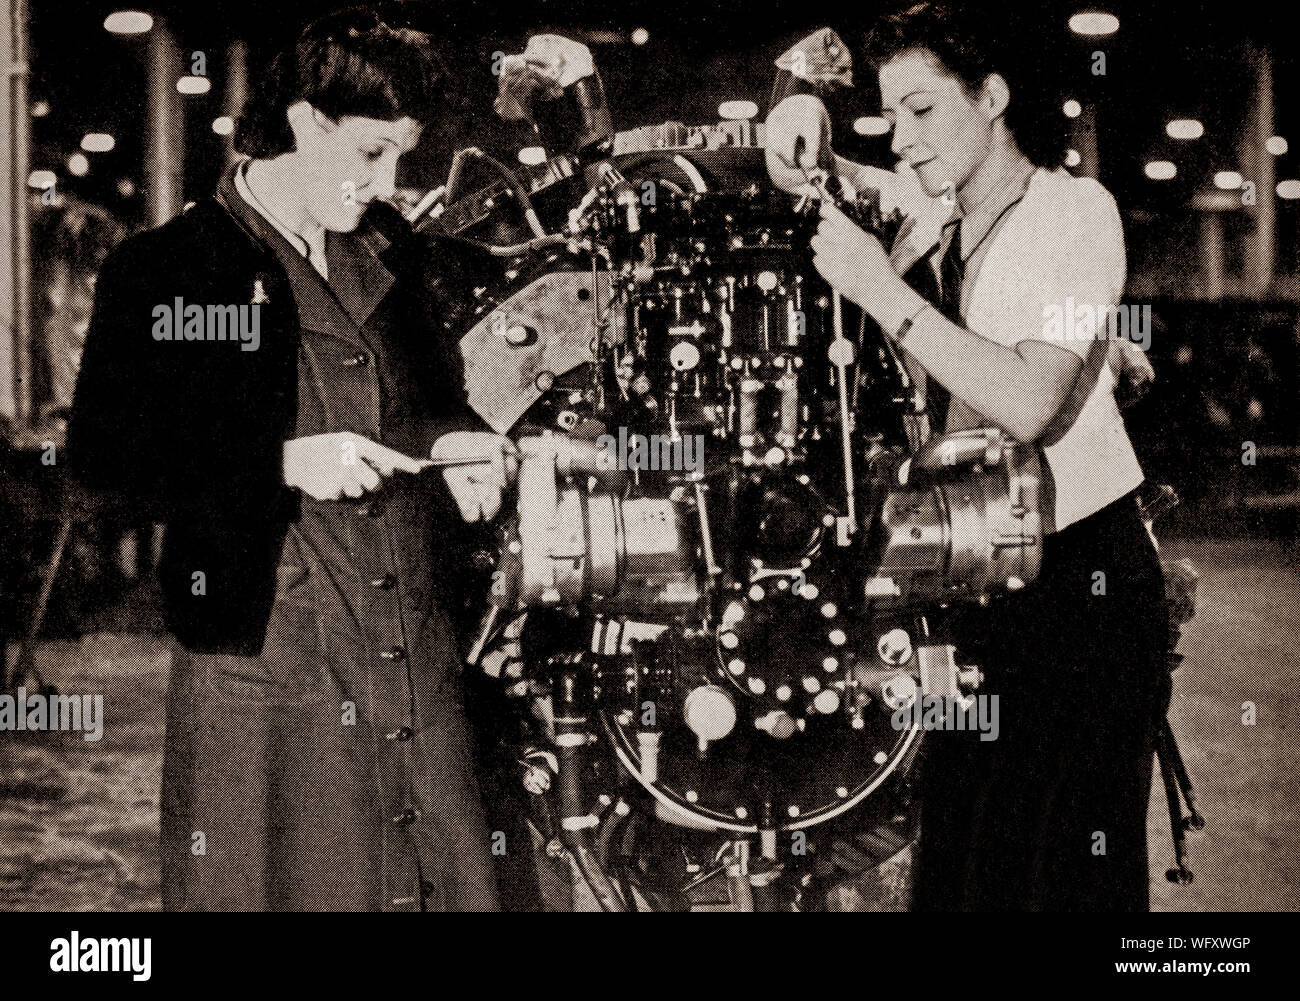 A Bristol Hercules engine undergoing inspection before going to the test bench for preliminery running trials. The 14-cylinder two-row radial aircraft engine designed by Sir Roy Fedden and produced by the Bristol Engine Company starting in 1939. It was the first of their single sleeve valve (Burt-McCollum, or Argyll, type) designs to see widespread use, powering many aircraft in the mid-World War II timeframe. Stock Photo